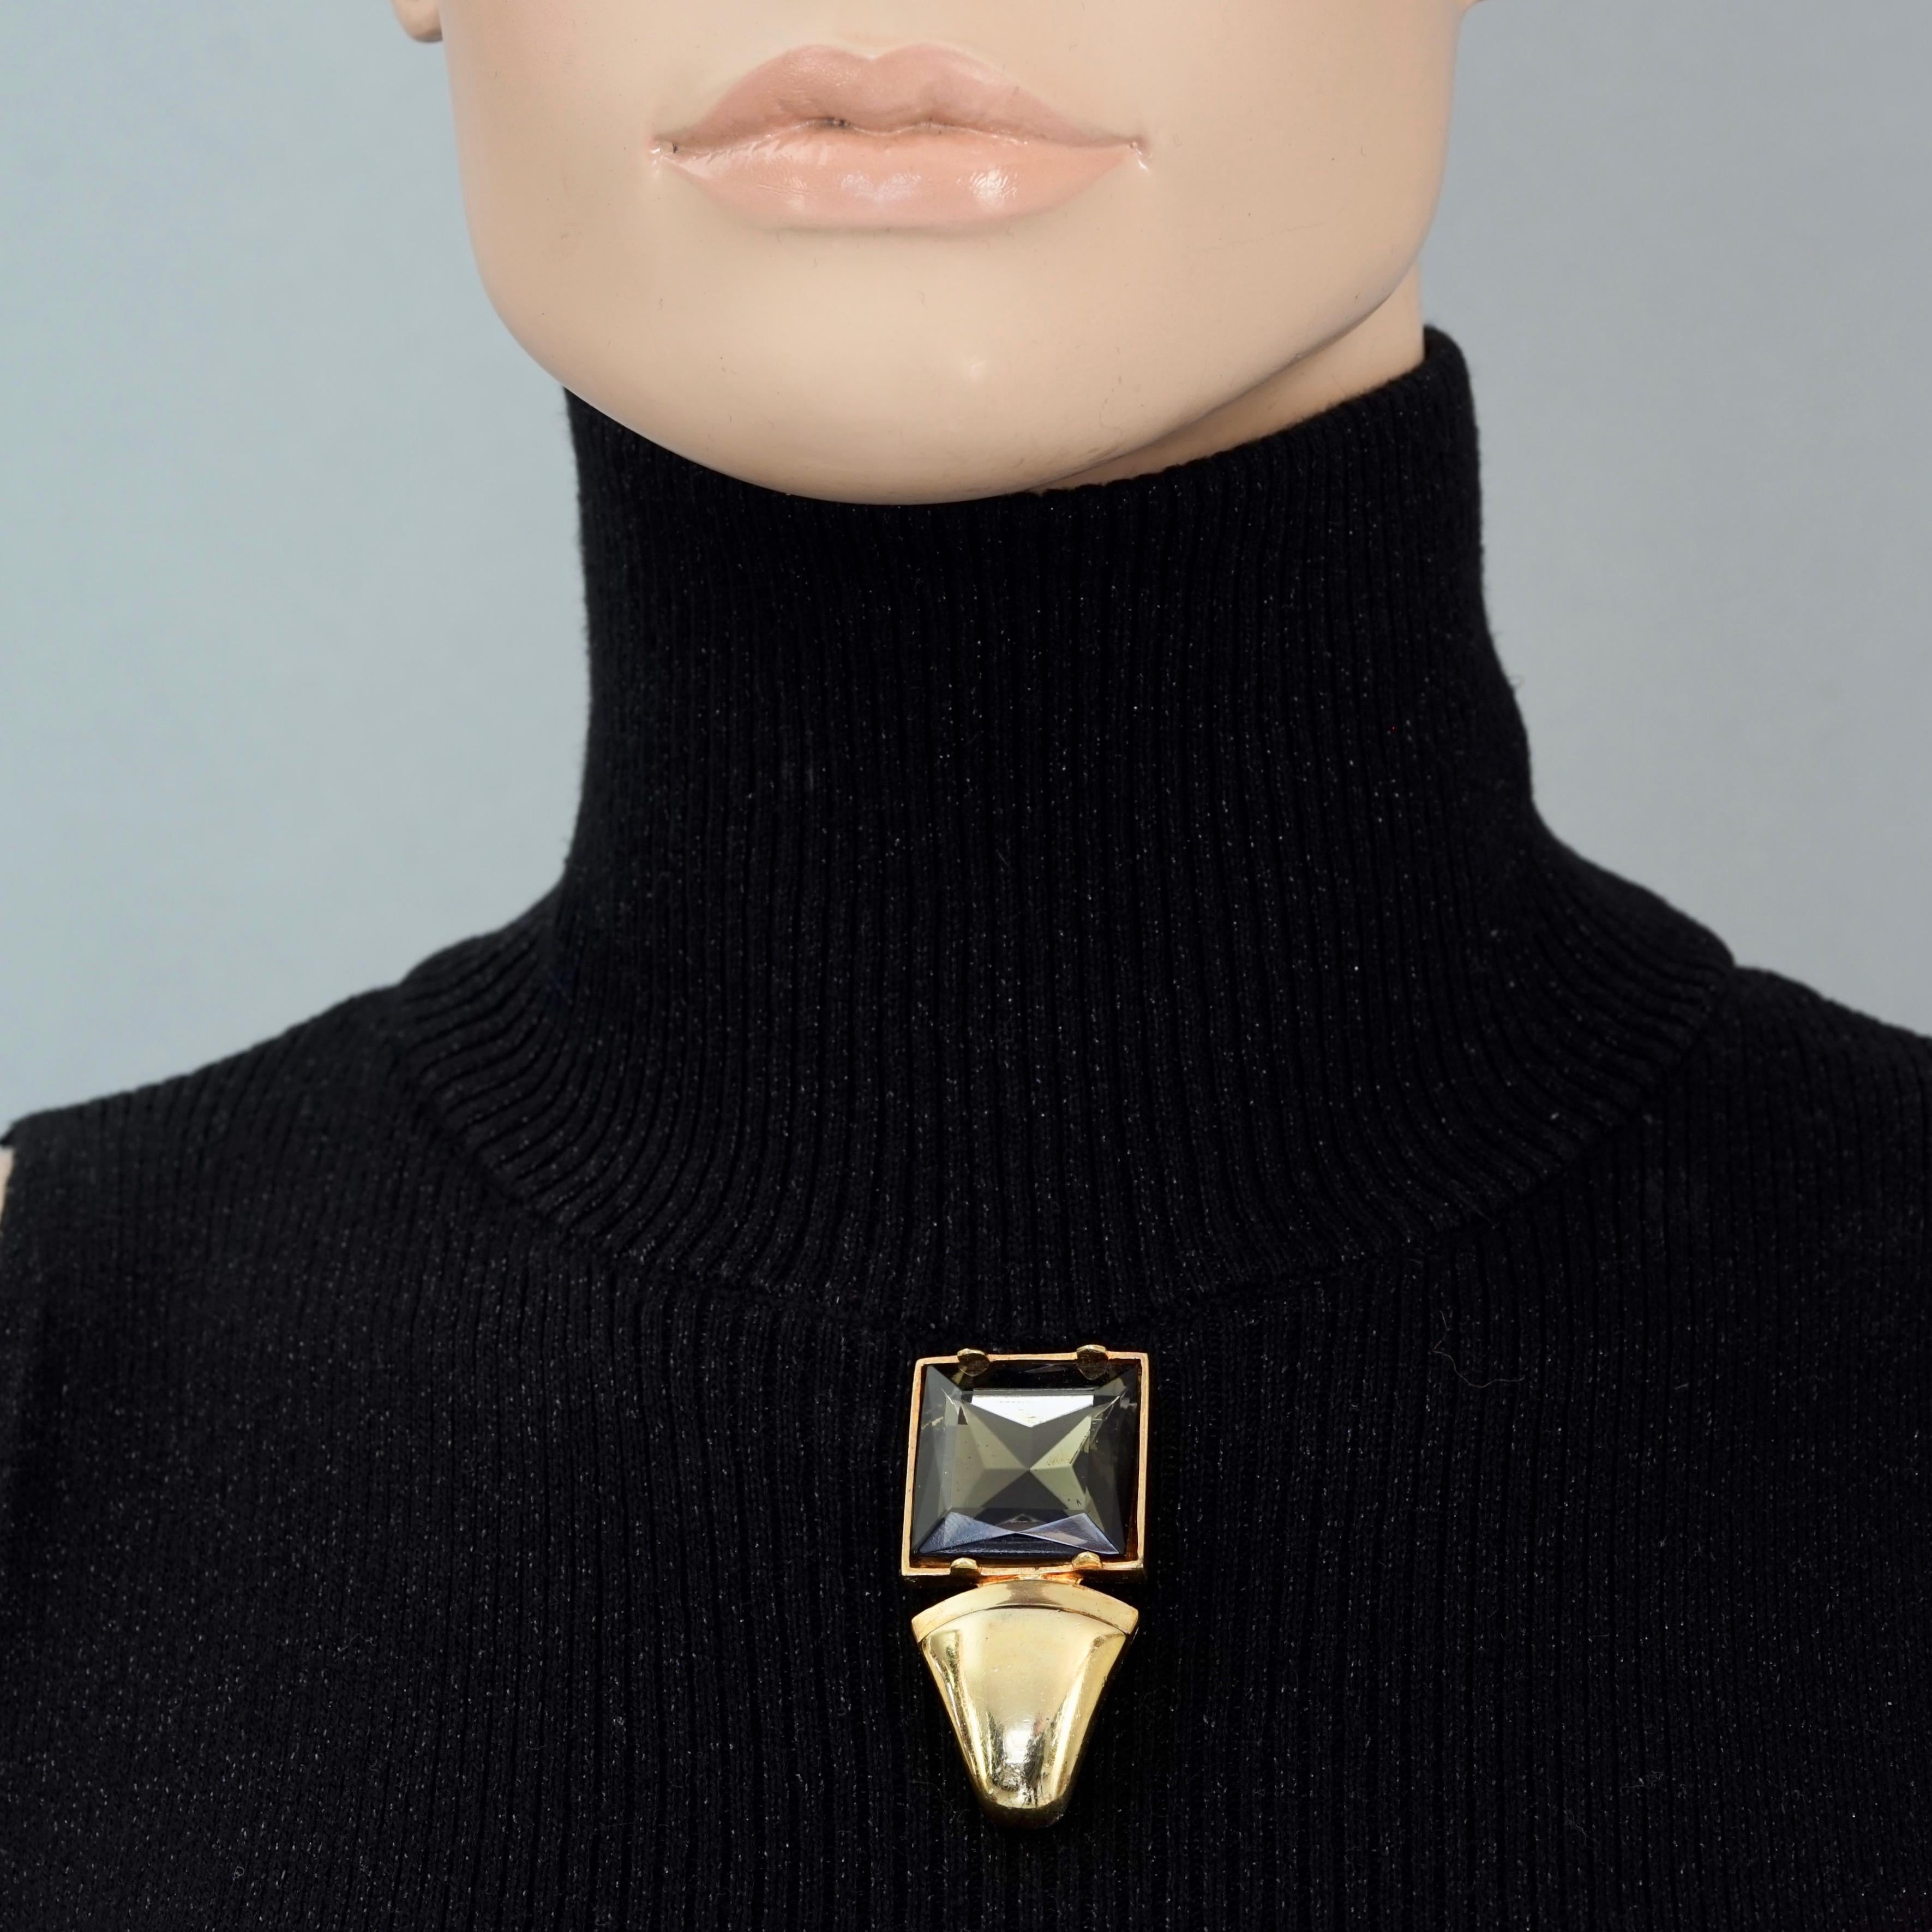 Vintage KARL LAGERFELD Geometric Diamant Brooch

Measurements:
Height: 2.04 inches (5.2cm)
Width: 1.02 inches (2.6 cm)

Features:
- 100% Authentic KARL LAGERFELD.
- Geometric brooch with faceted diamant embellishment.
- Gold tone hardware.
- Signed